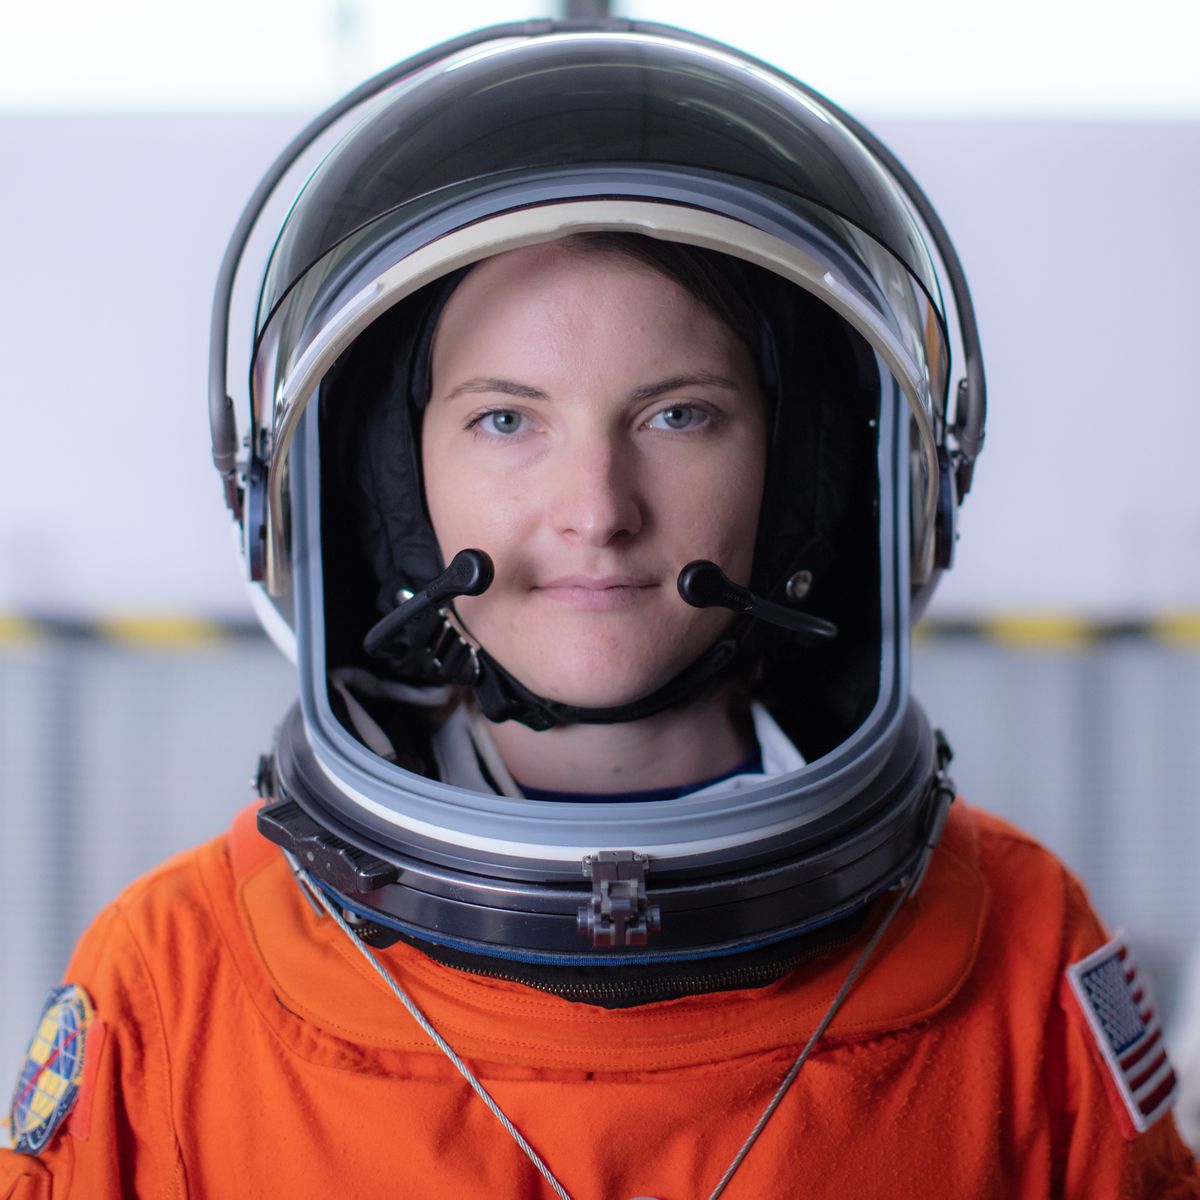 Kayla Barron poses for a portrait after donning her spacesuit at NASA